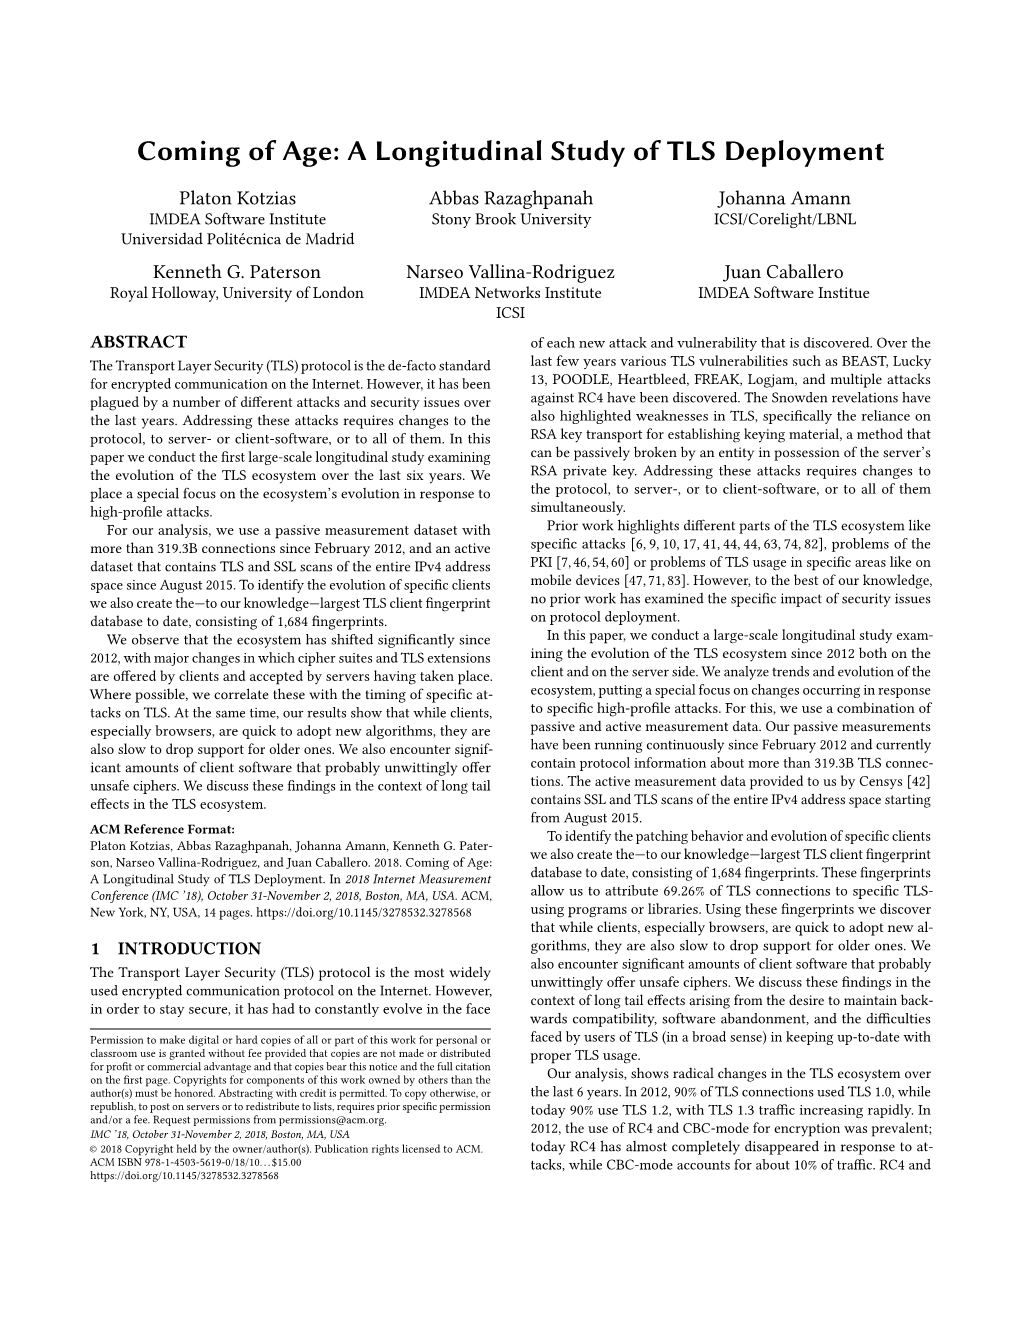 Coming of Age: a Longitudinal Study of TLS Deployment